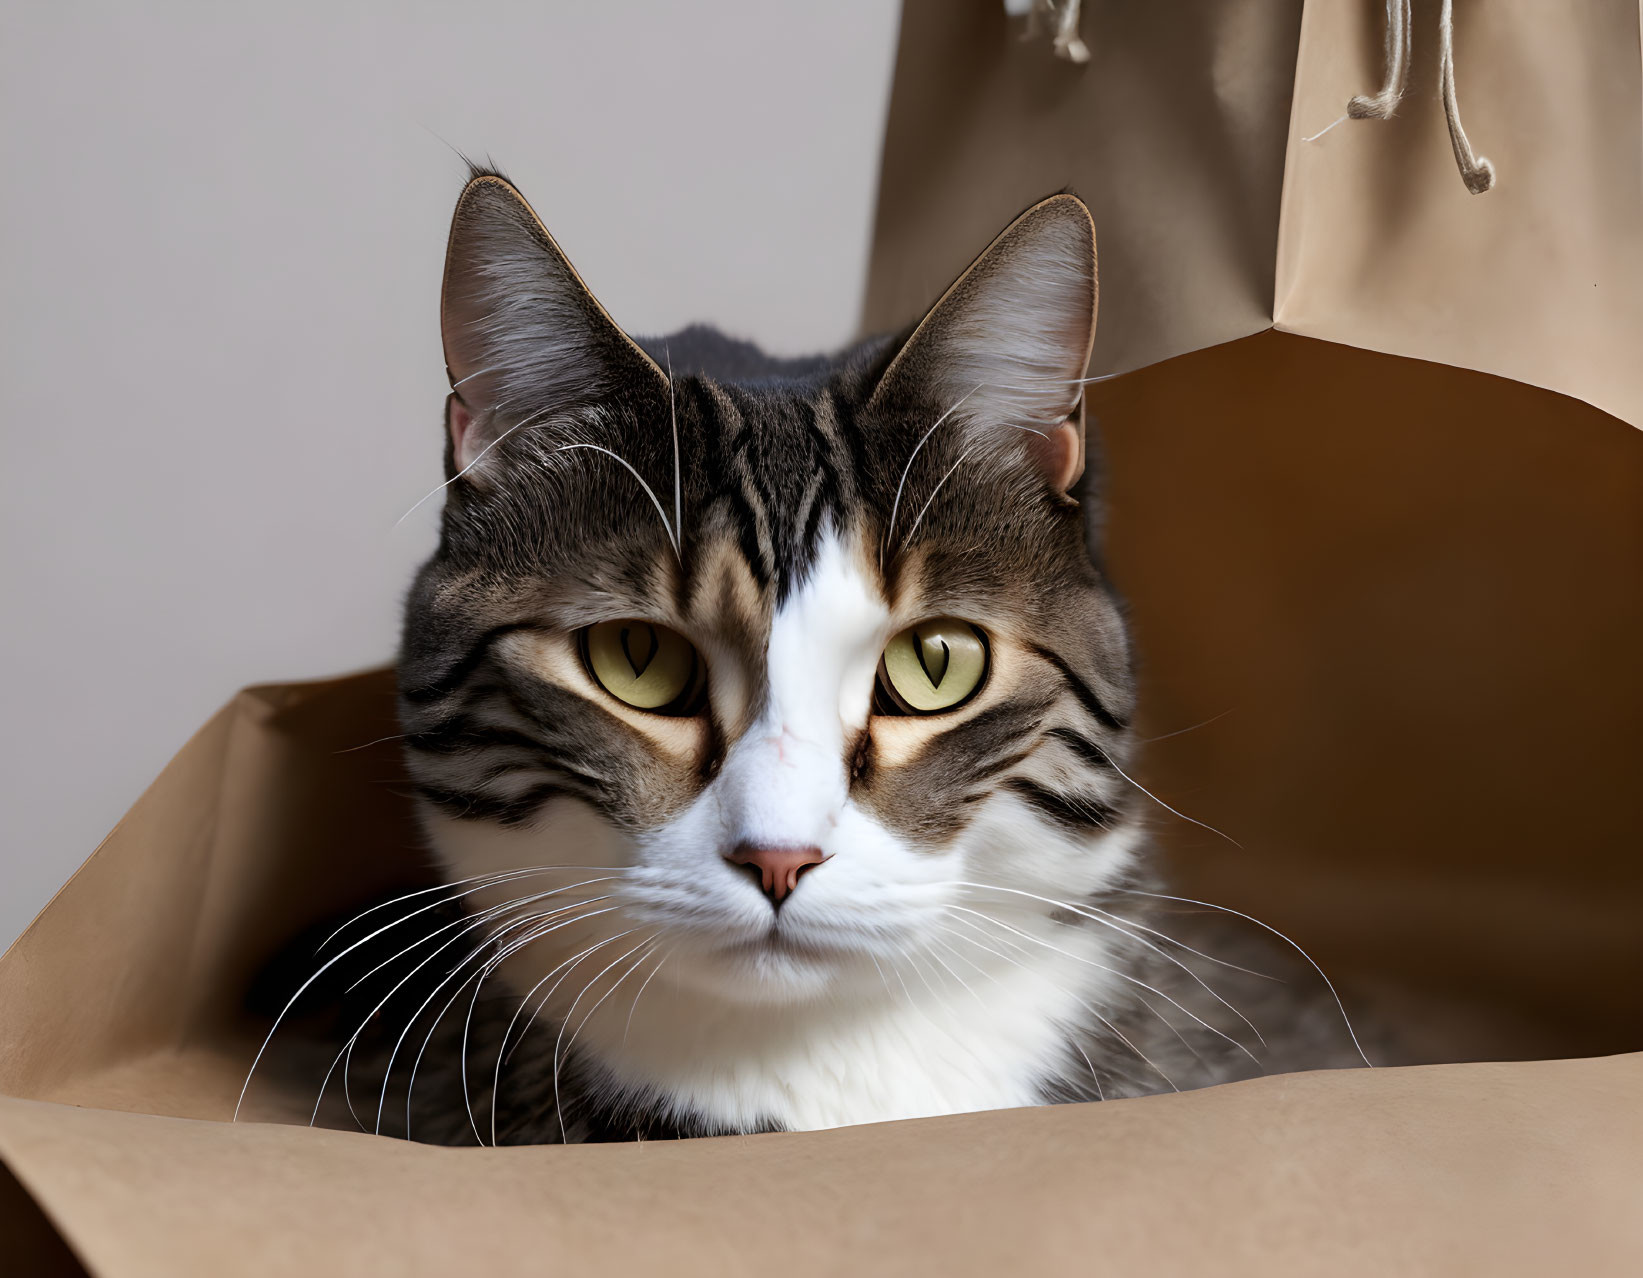 Tabby Cat with Unique Markings and Yellow Eyes in Brown Paper Bag